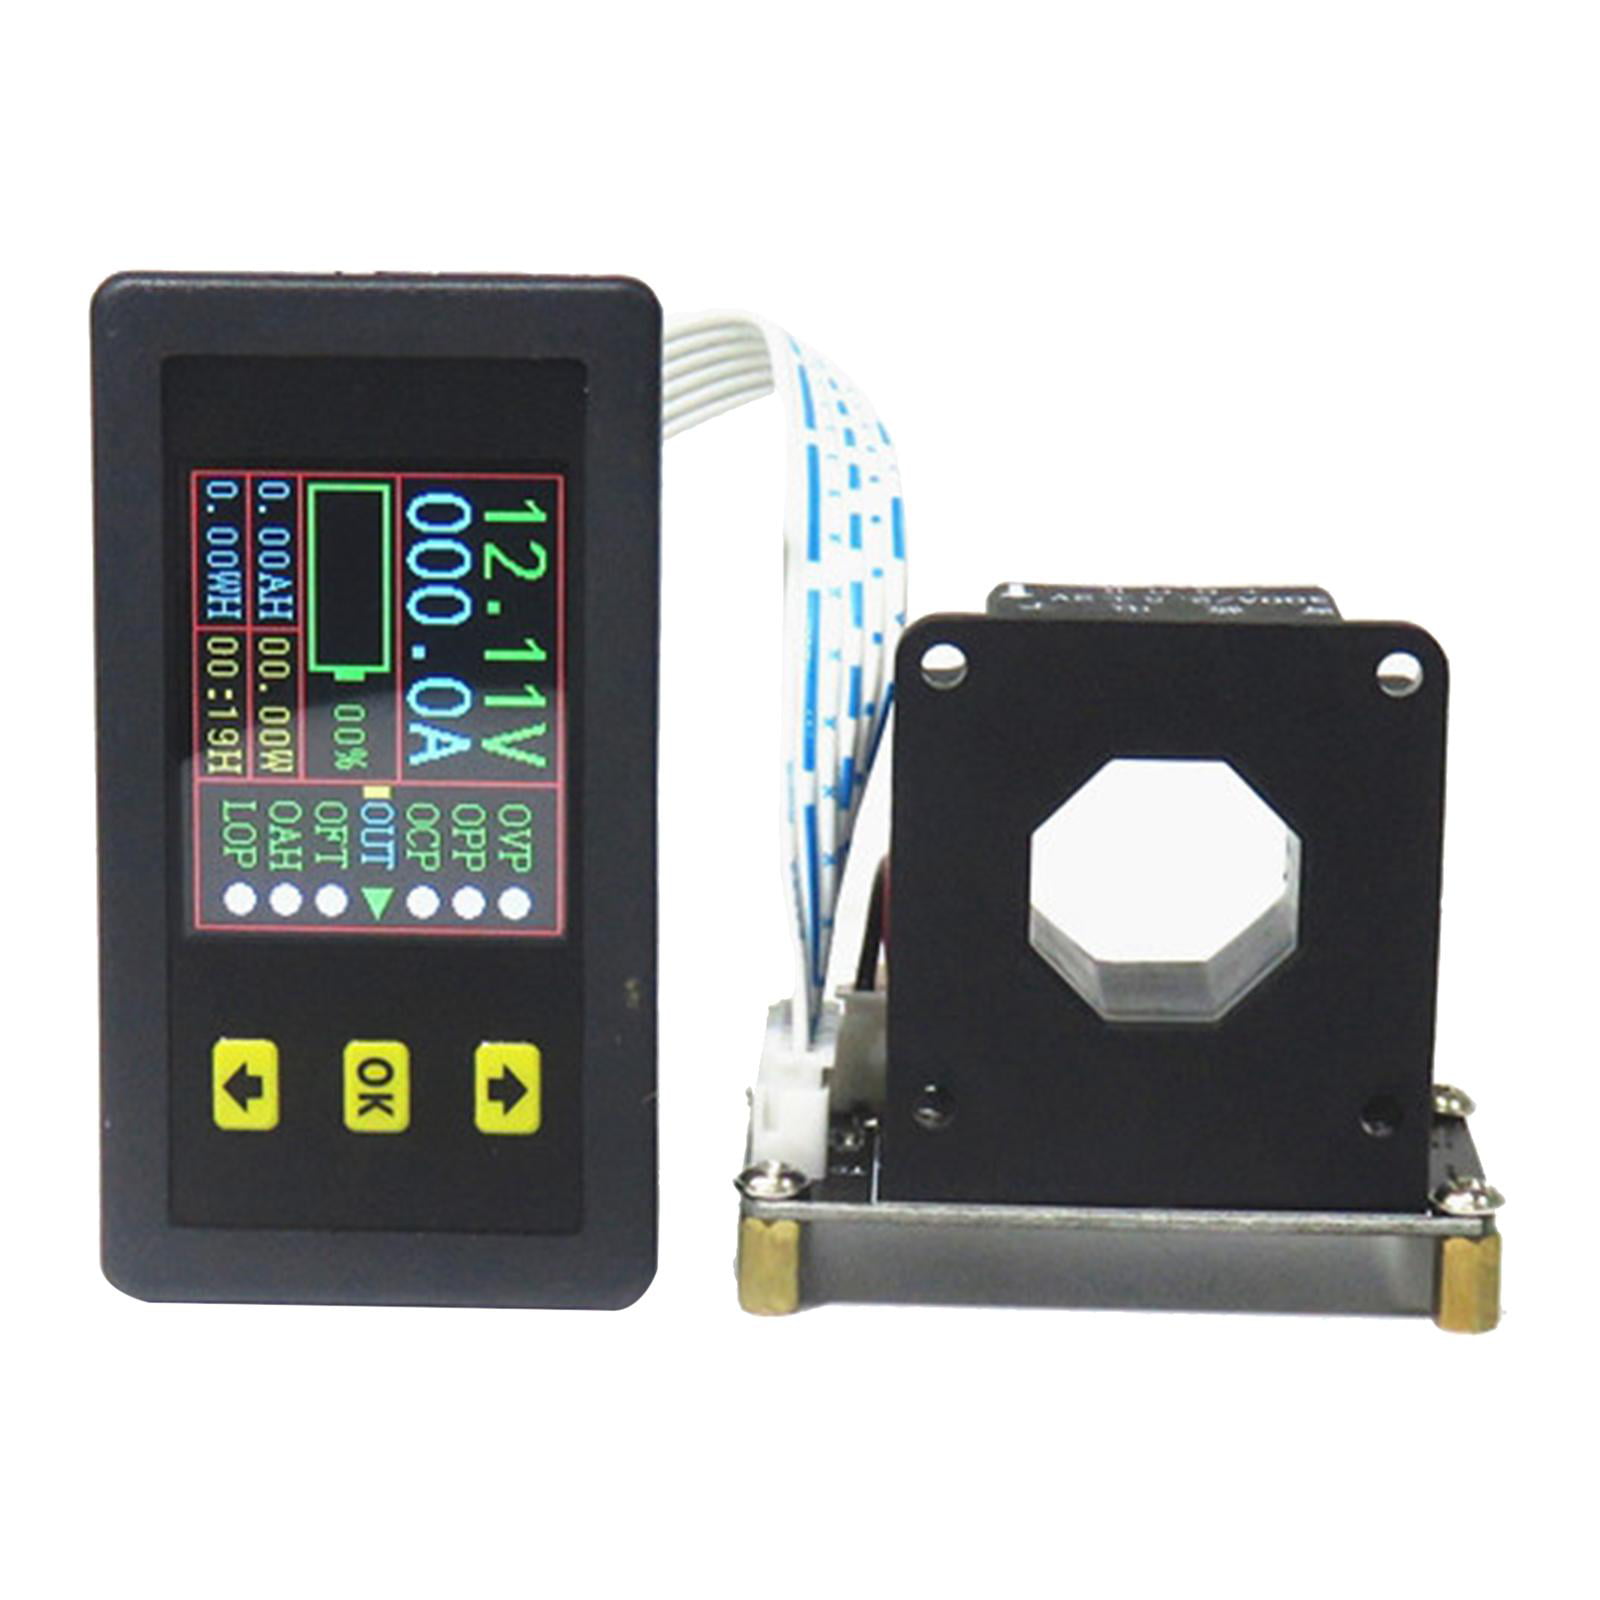 4-in-1 AC Combo Meter Power Tester Digital Electrical Panel Monitor LCD Display 